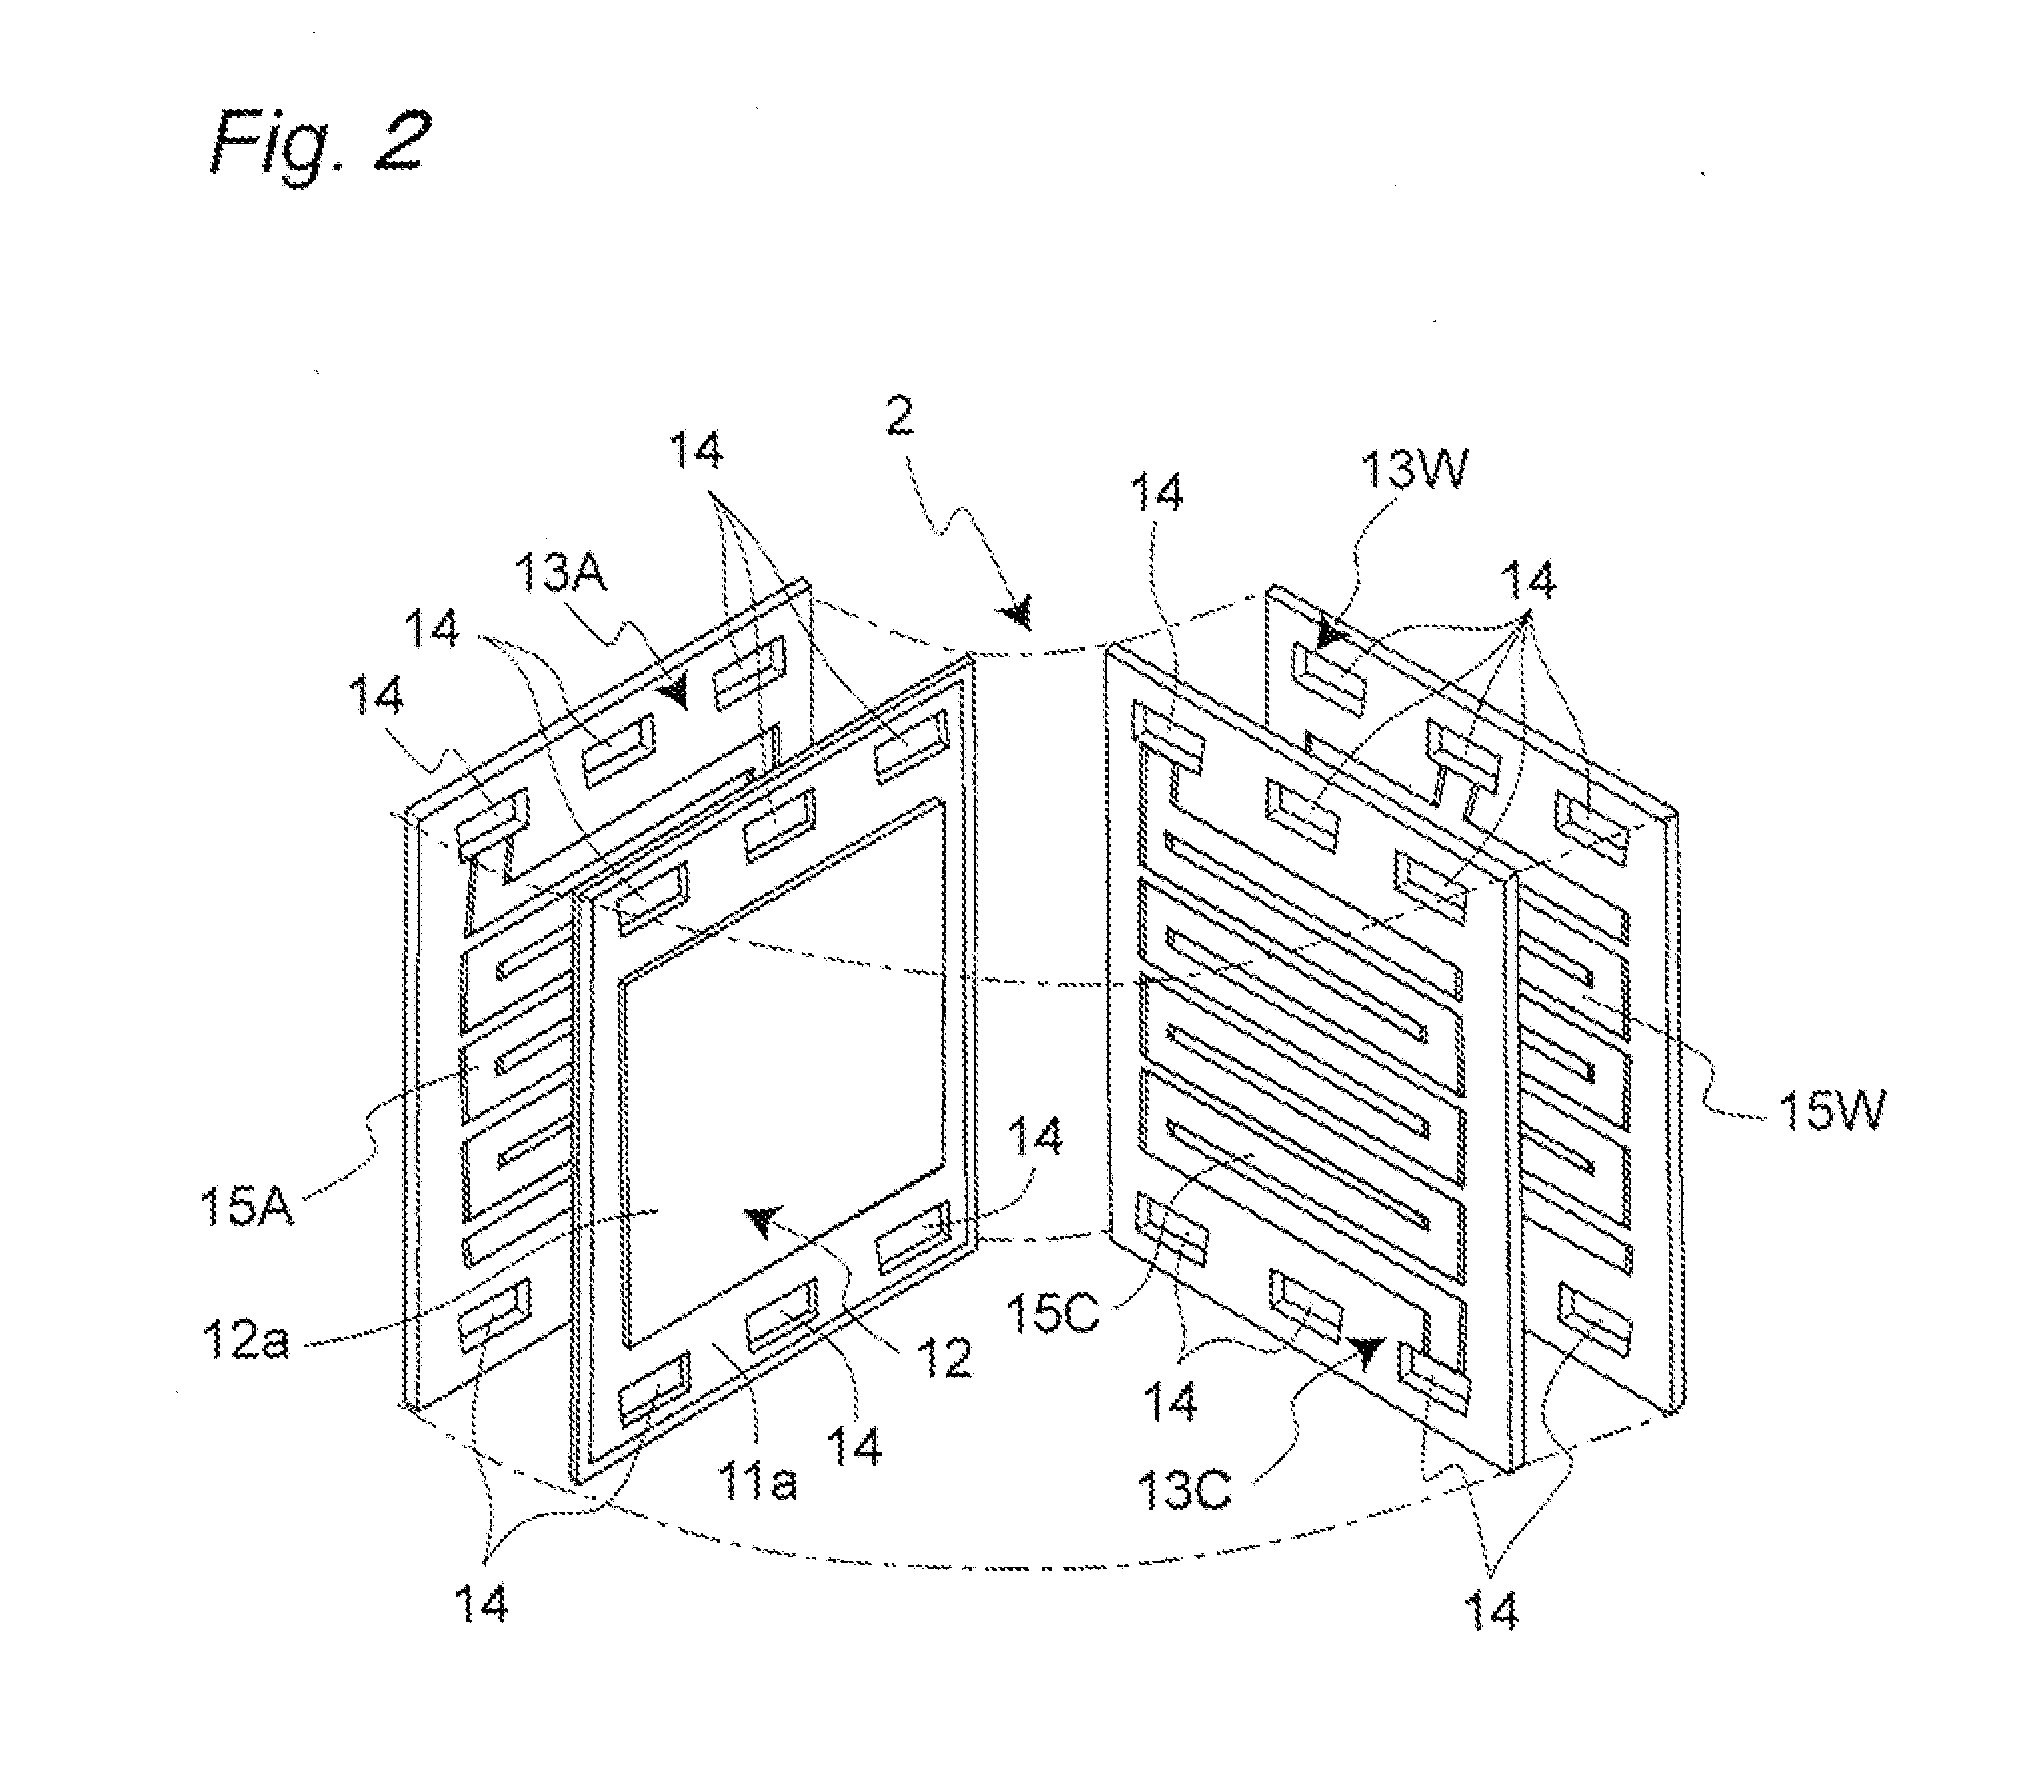 Polymer electrolyte fuel cell stack